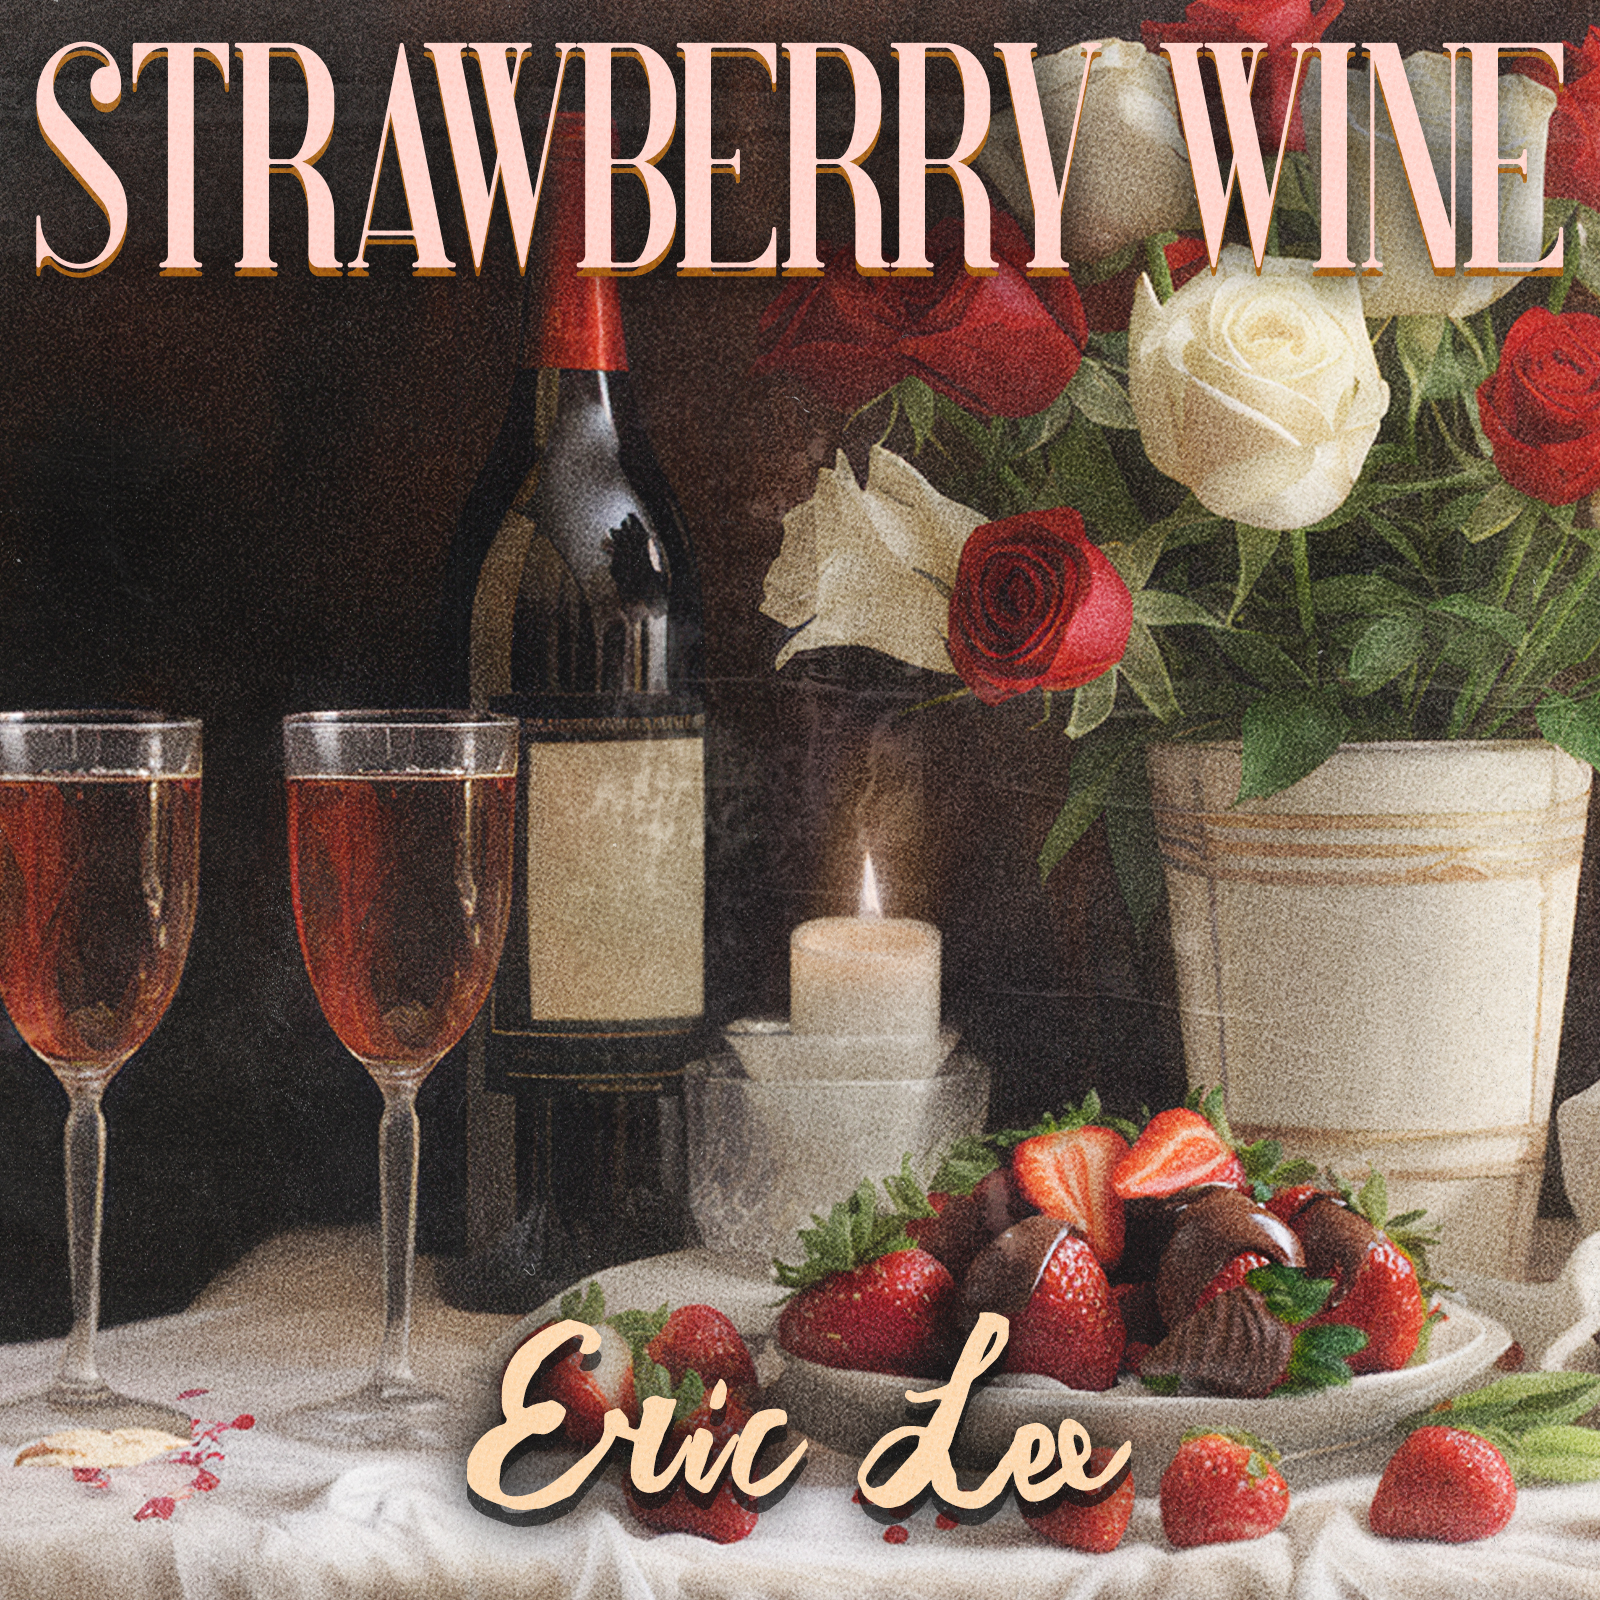 Art for Strawberry Wine by Eric Lee